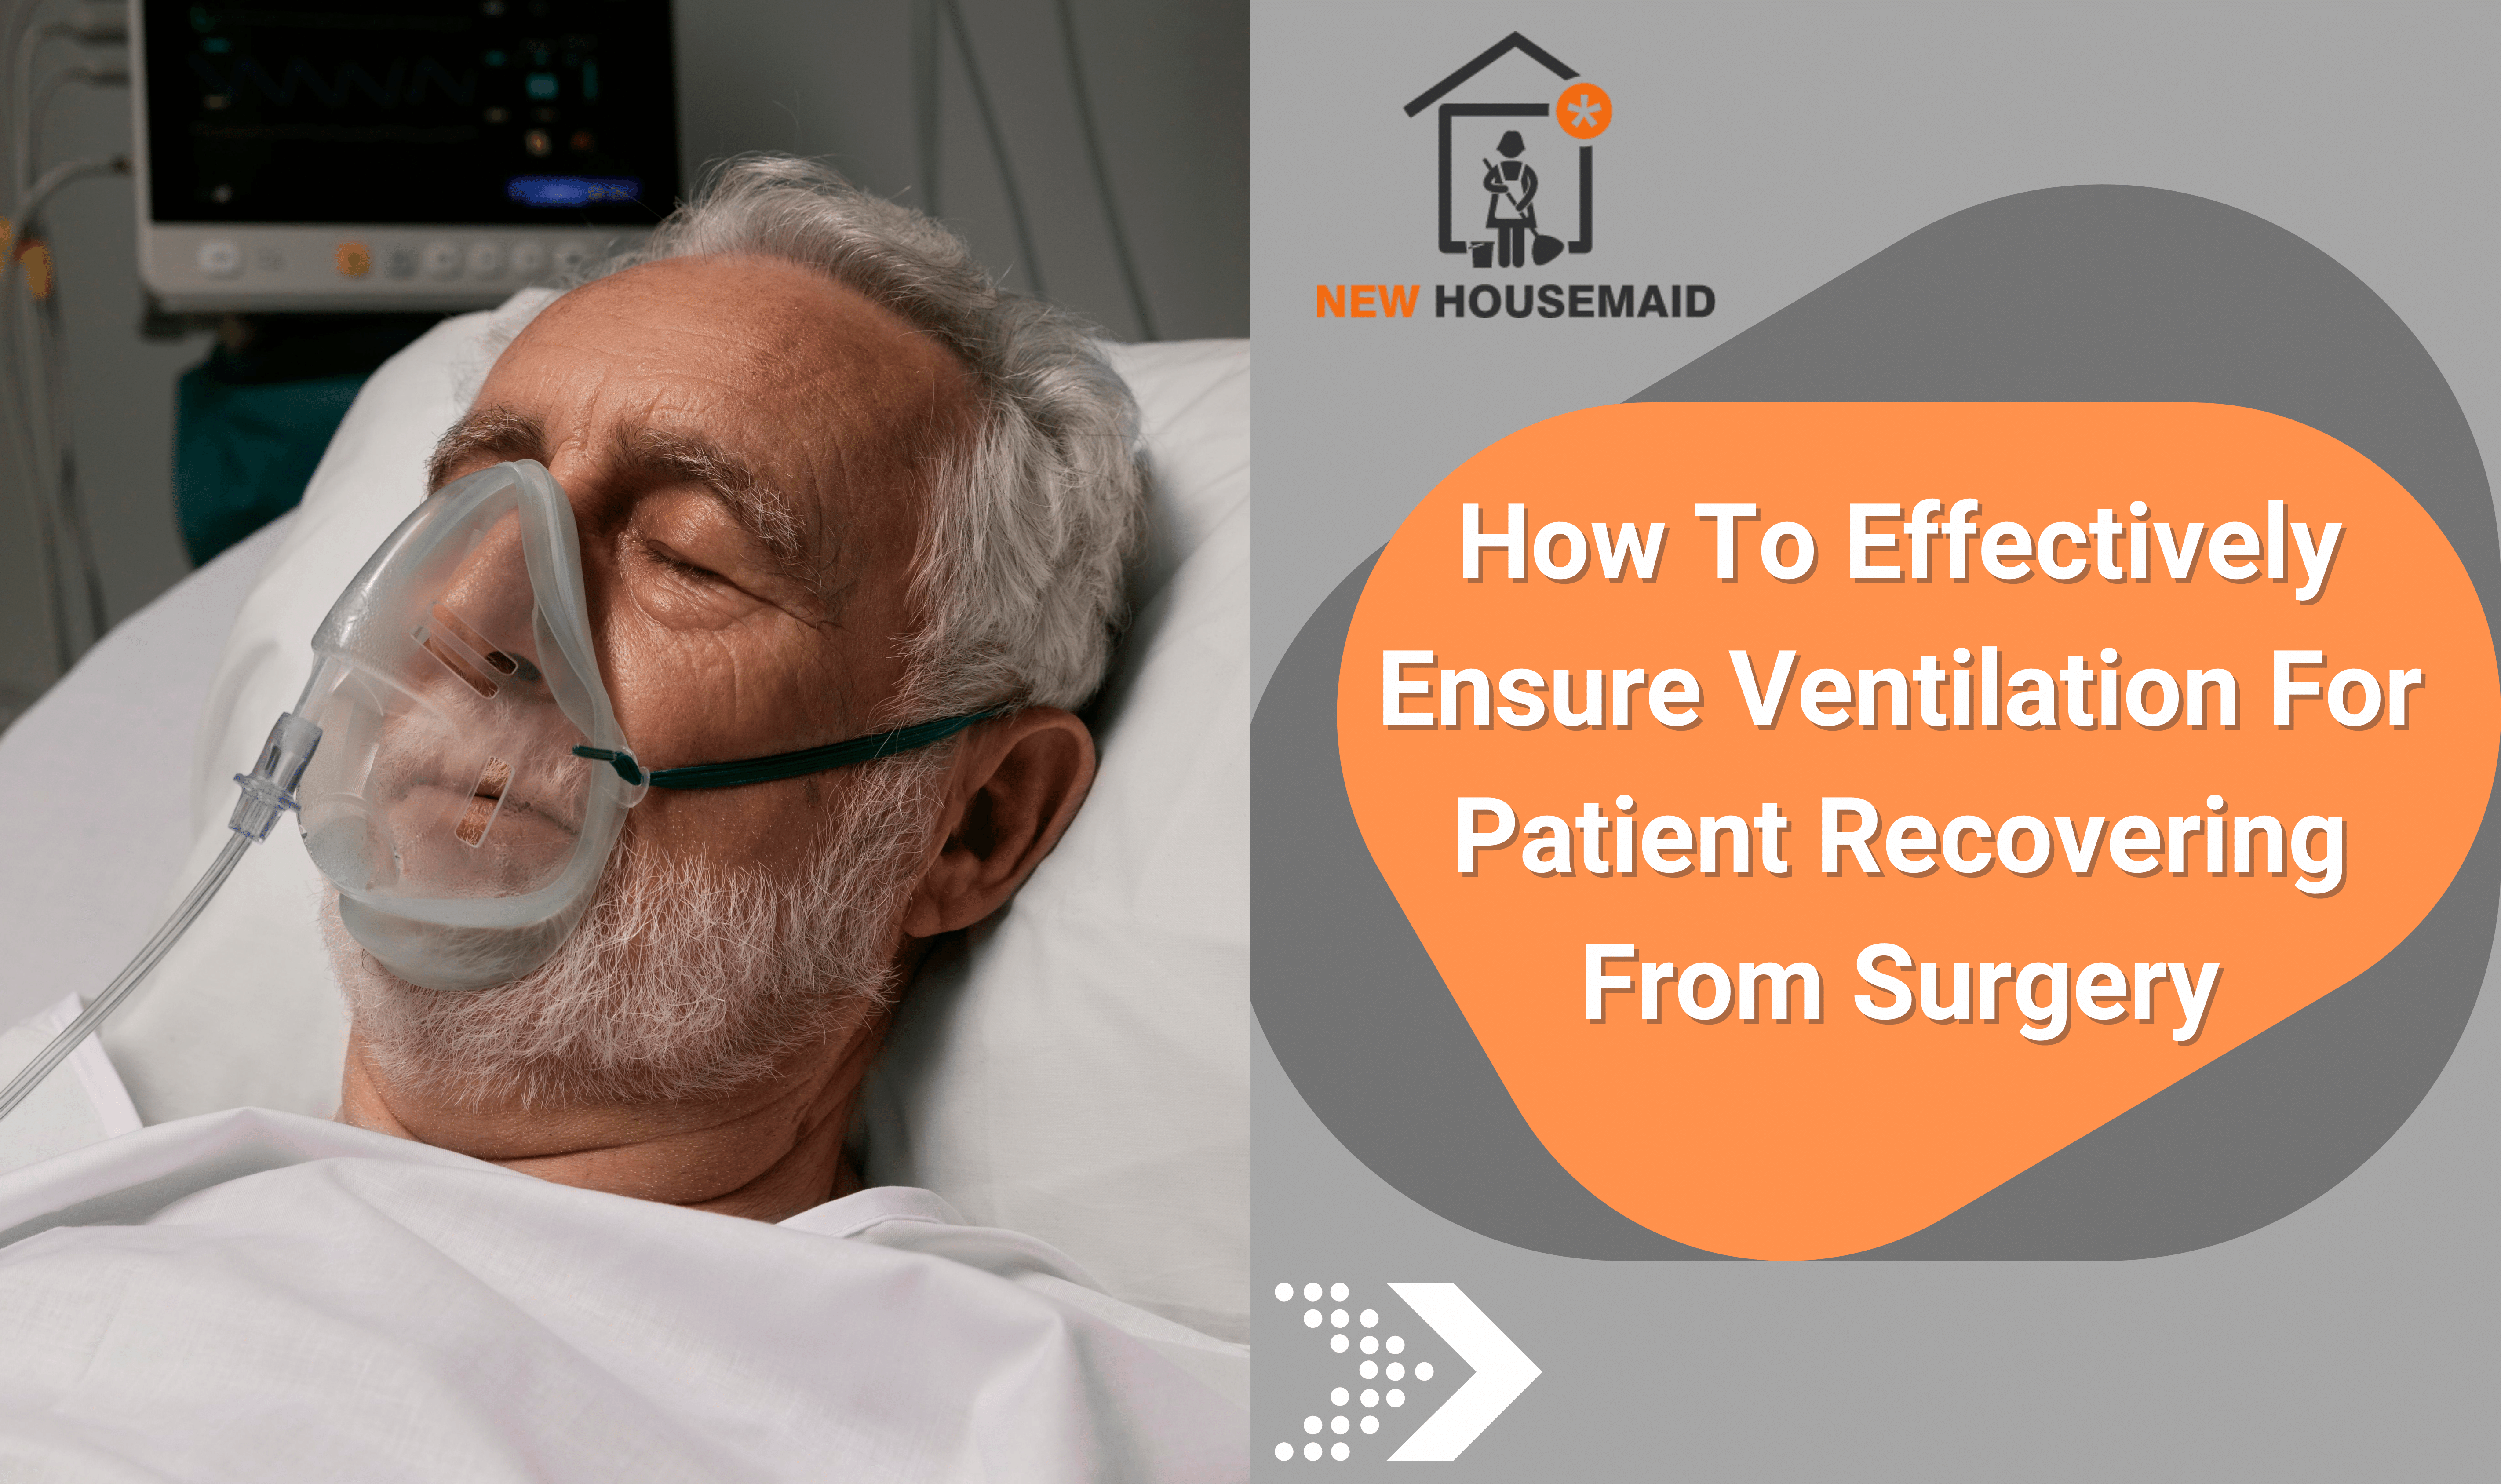 How to Effectively Ensure Ventilation for Patient Recovering from Surgery